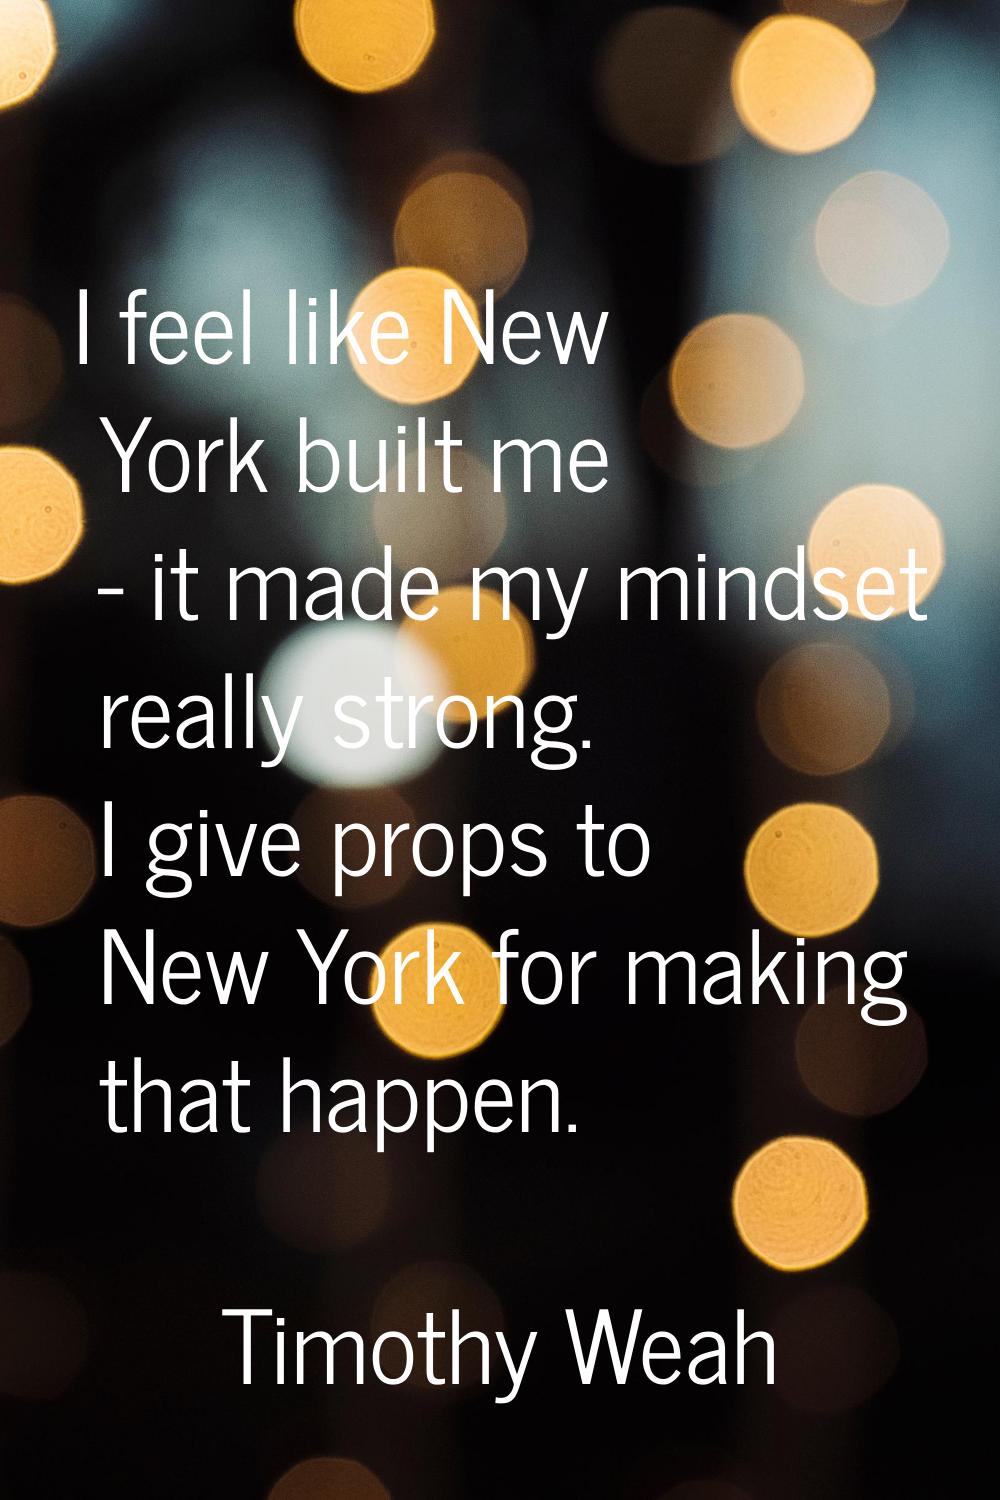 I feel like New York built me - it made my mindset really strong. I give props to New York for maki